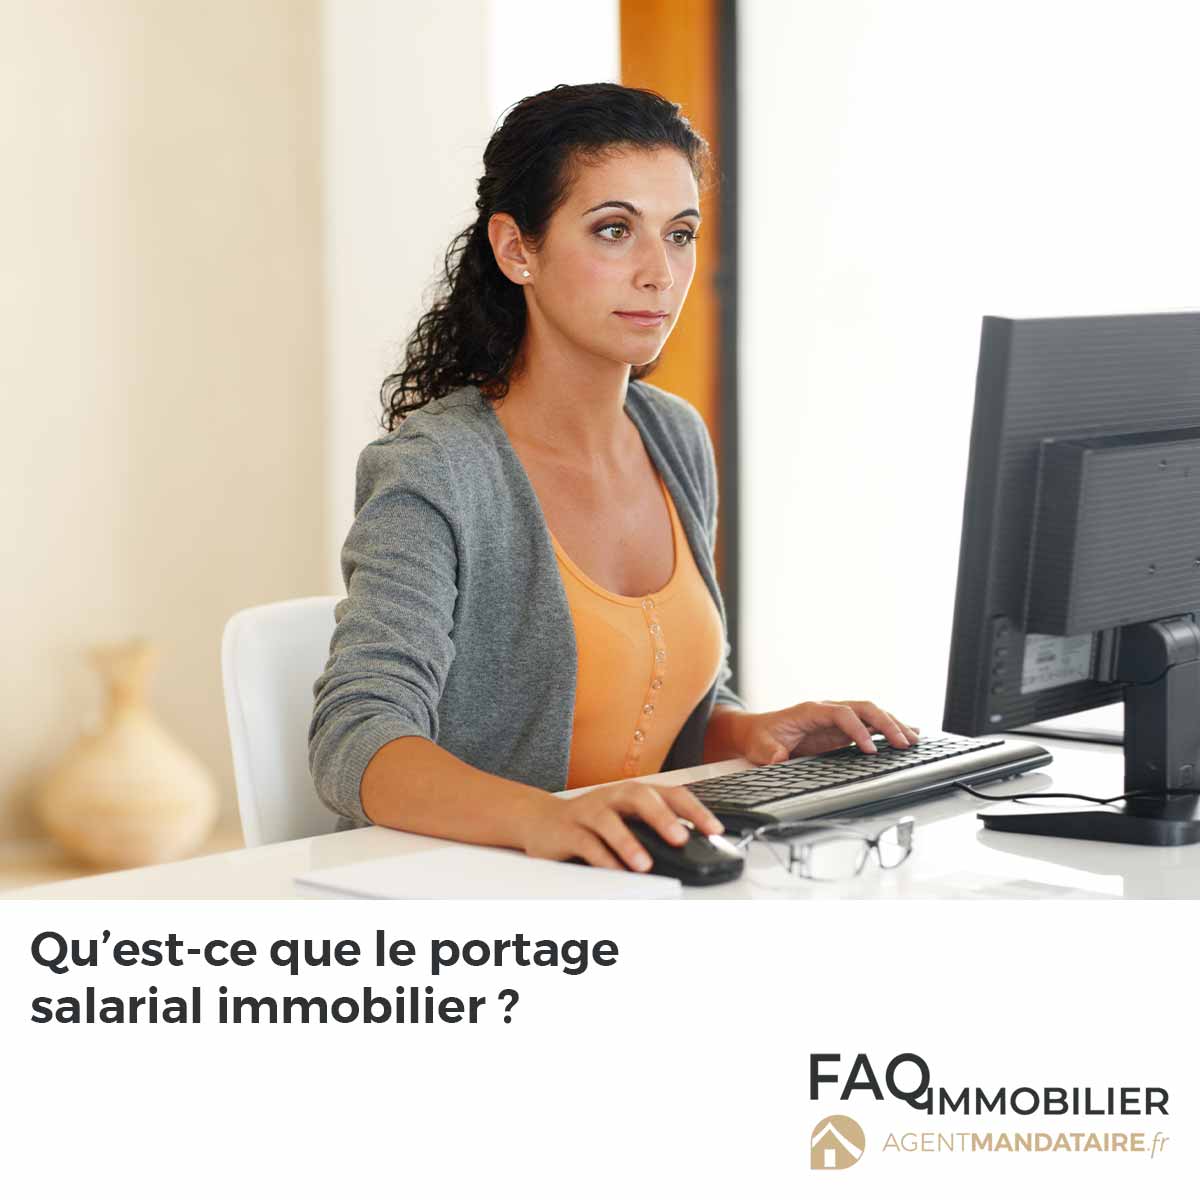 Le portage salarial immobilier